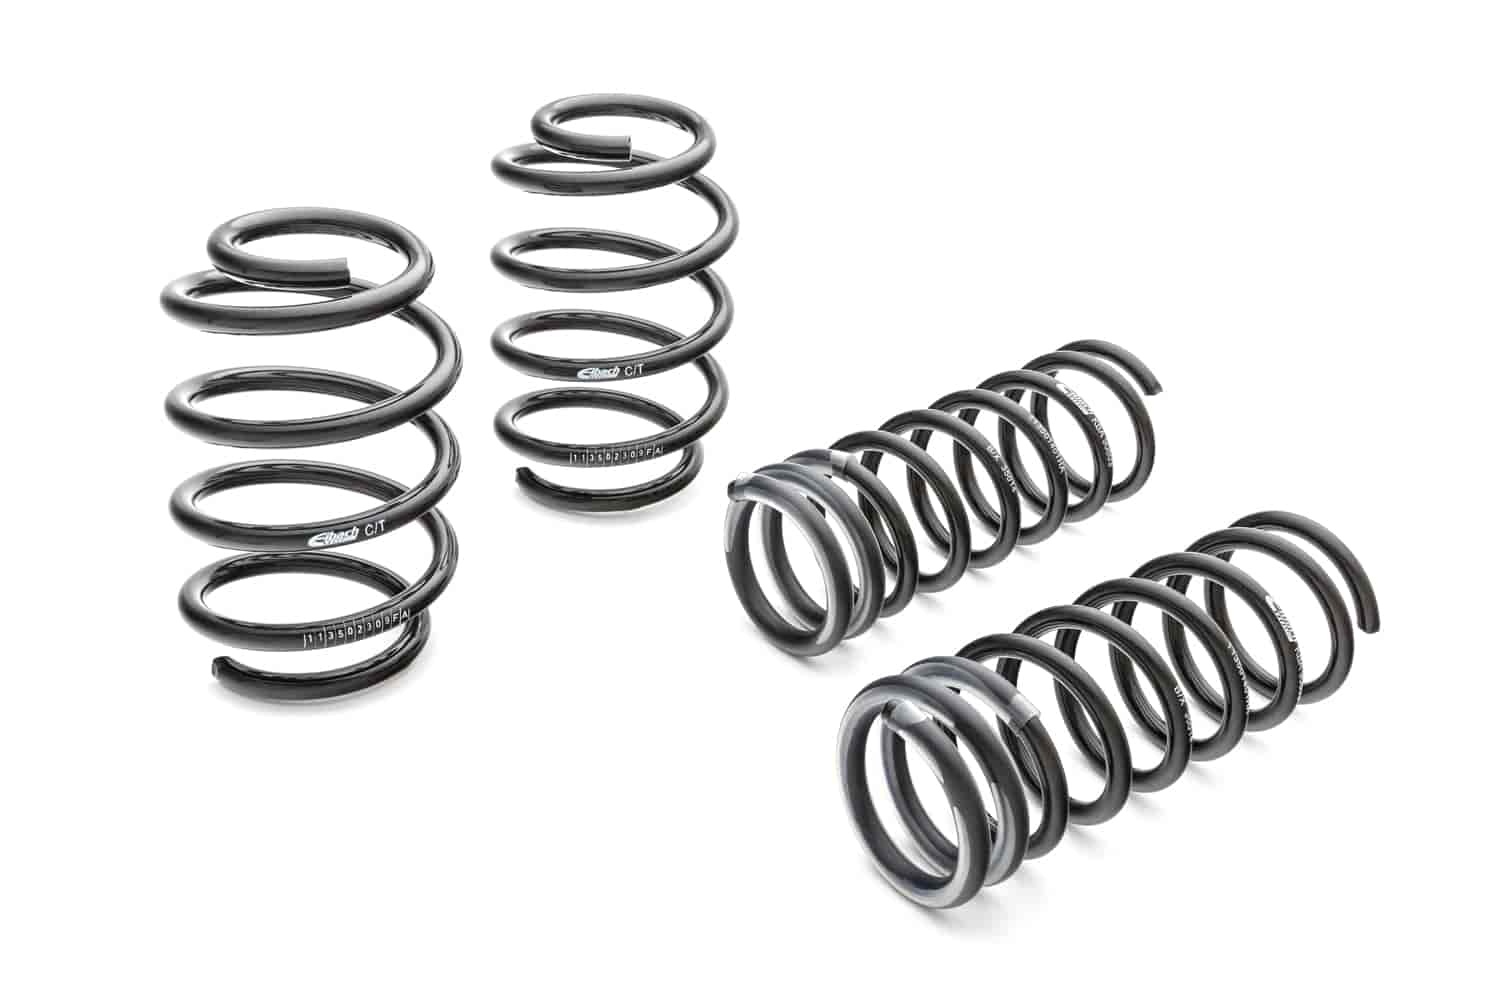 35134.140 Pro-Kit Lowering Springs 2012-2013 Ford Focus Exc. ST - .800 in. Front/Rear Drop